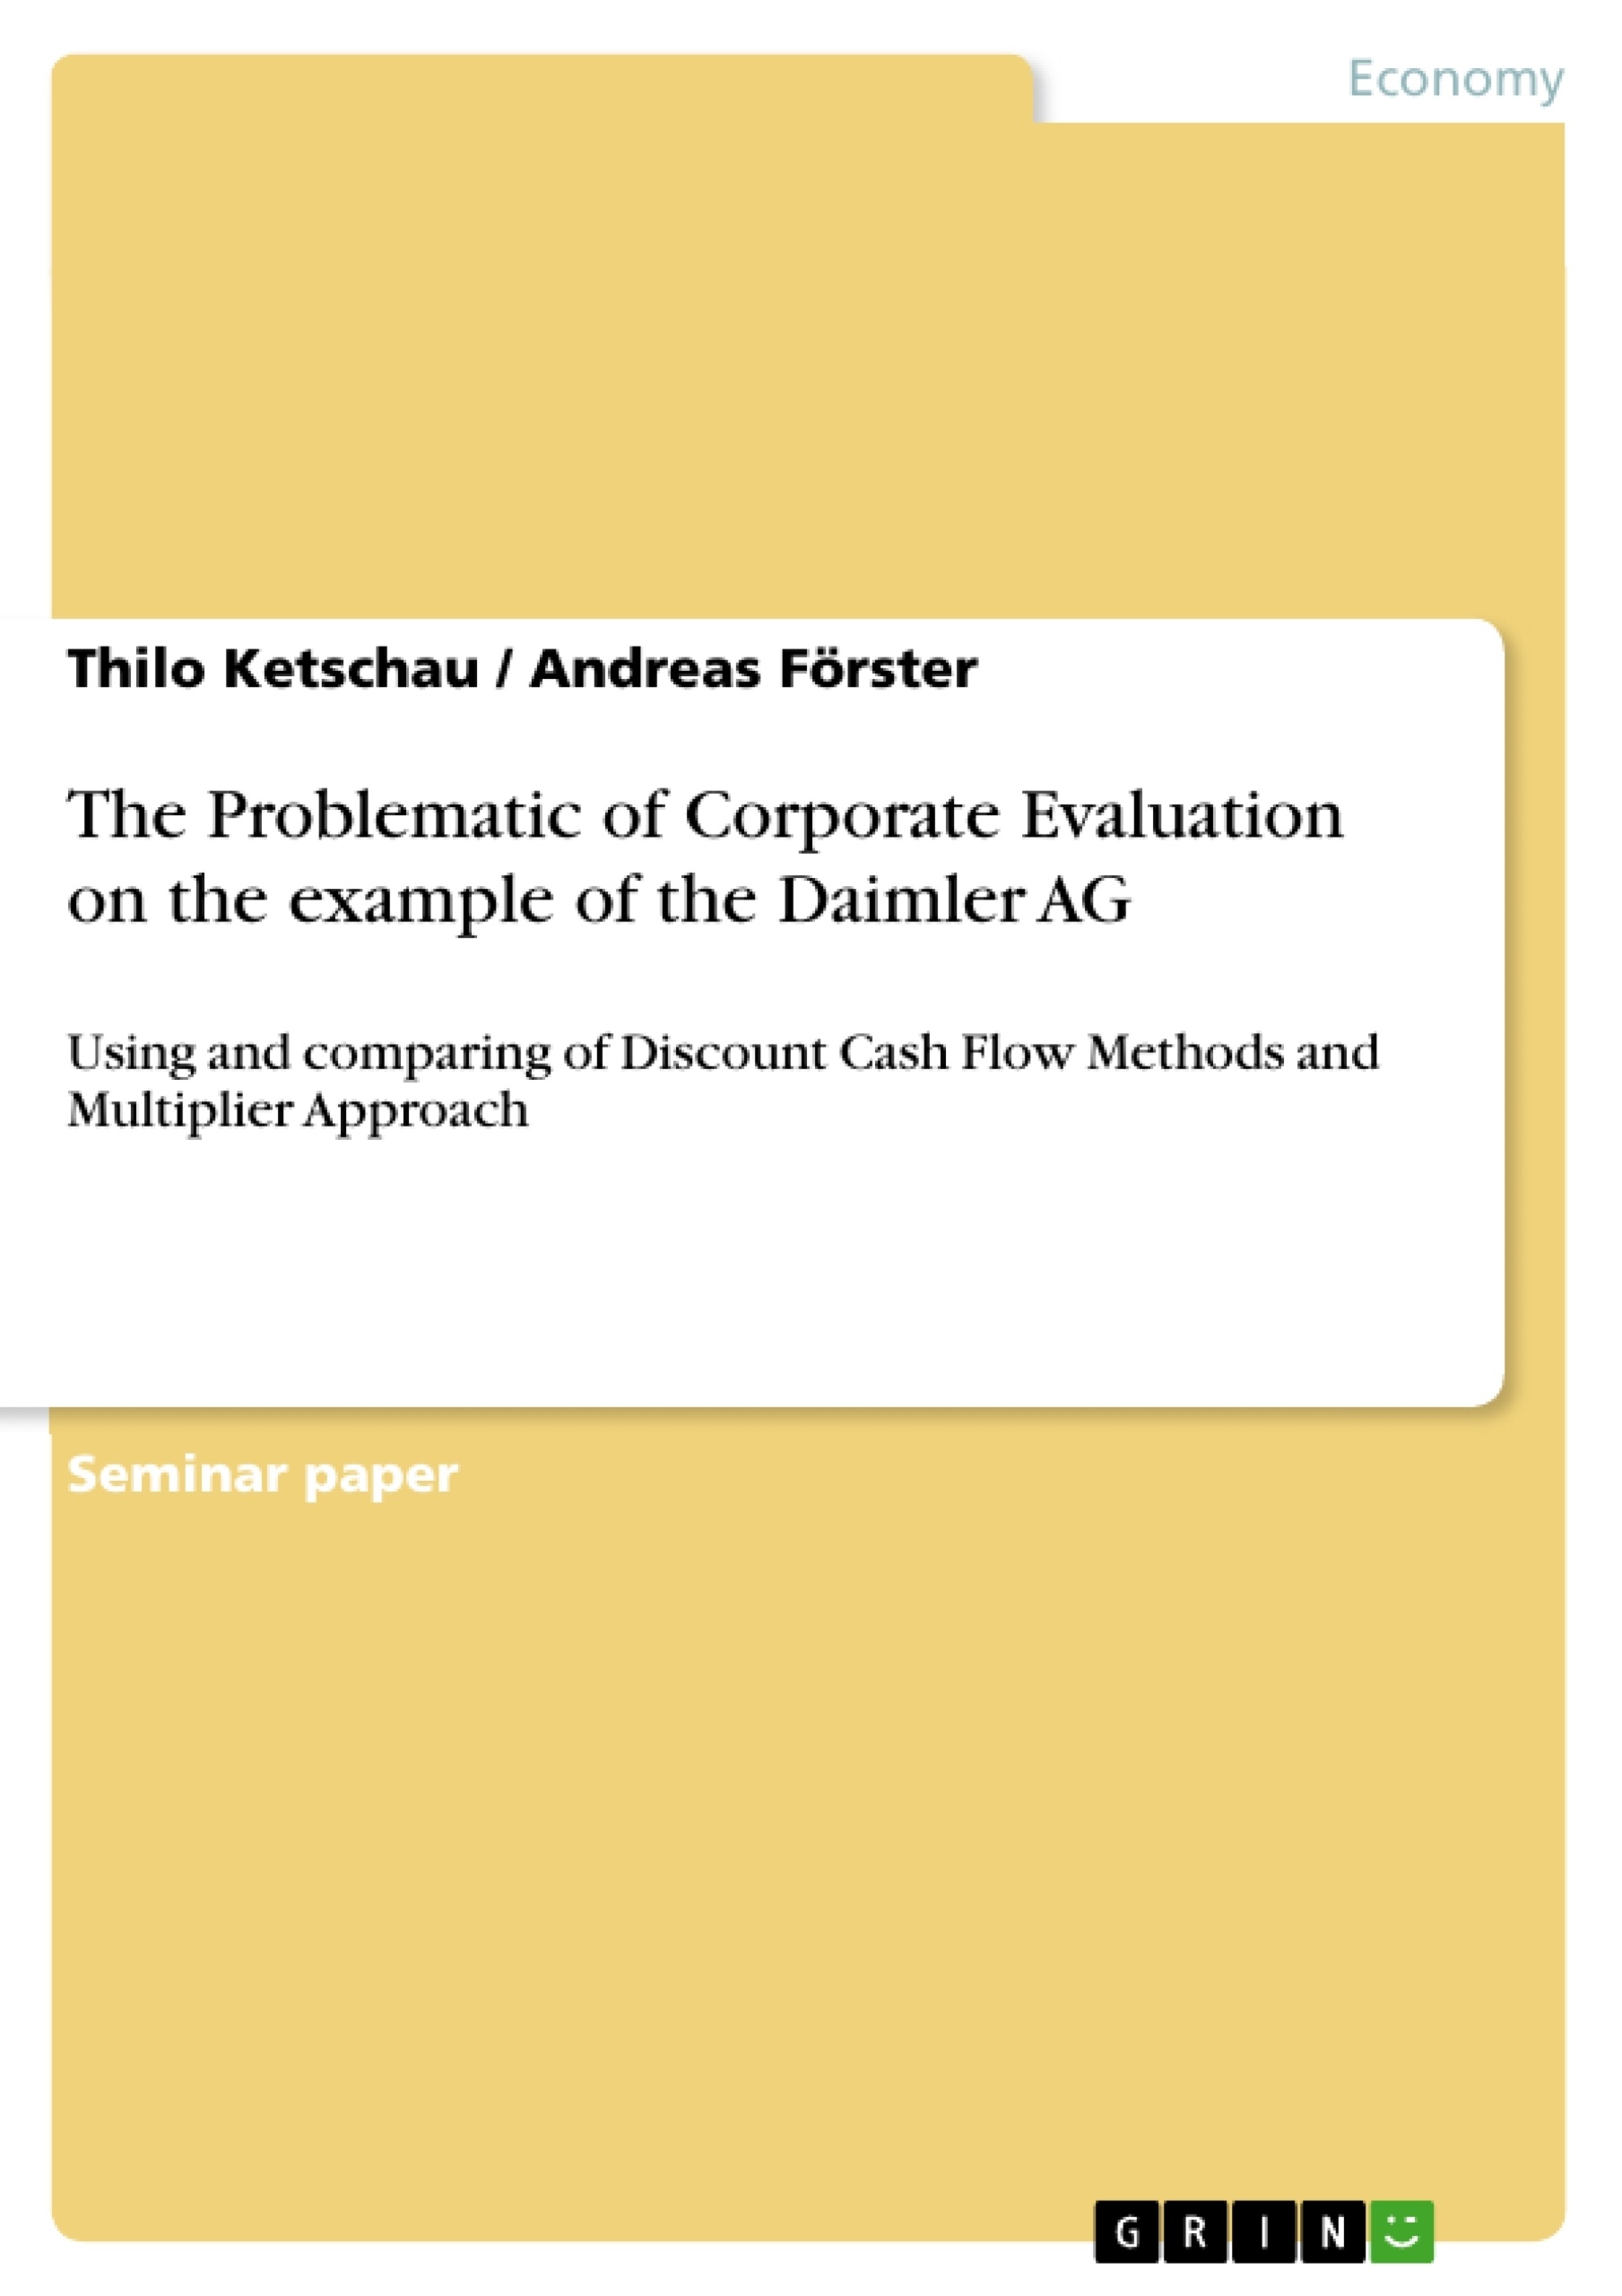 Titre: The Problematic of Corporate Evaluation on the example of the Daimler AG